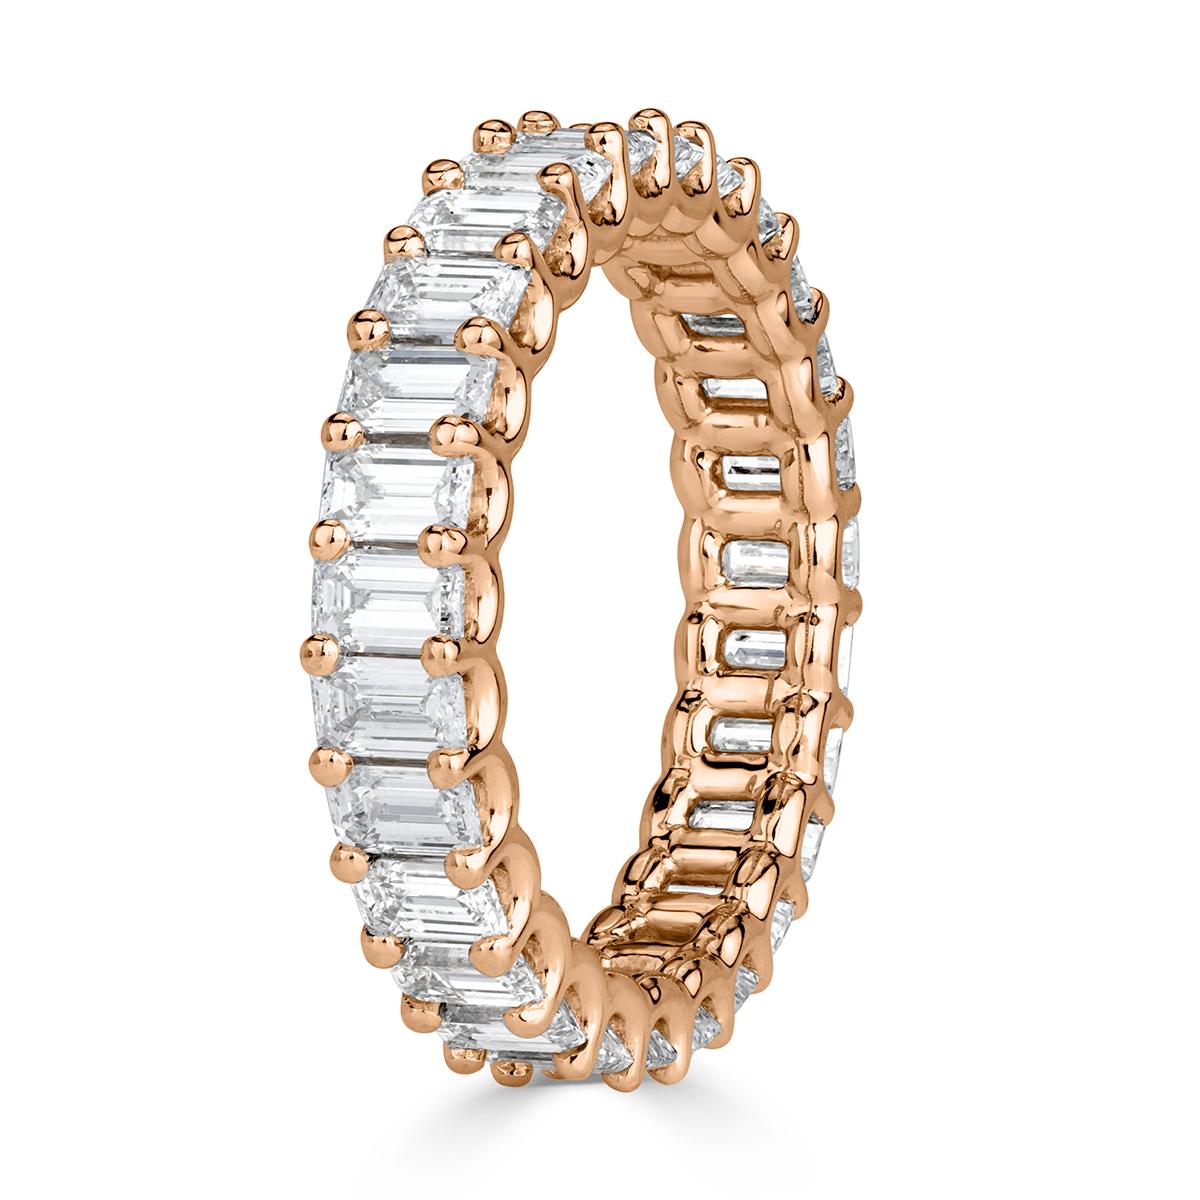 Created in 18k rose gold, this stunning diamond eternity band showacses 3.15ct of emerald cut diamonds graded at E-F in color, VVS2-VS1 in clarity. They are set in a 